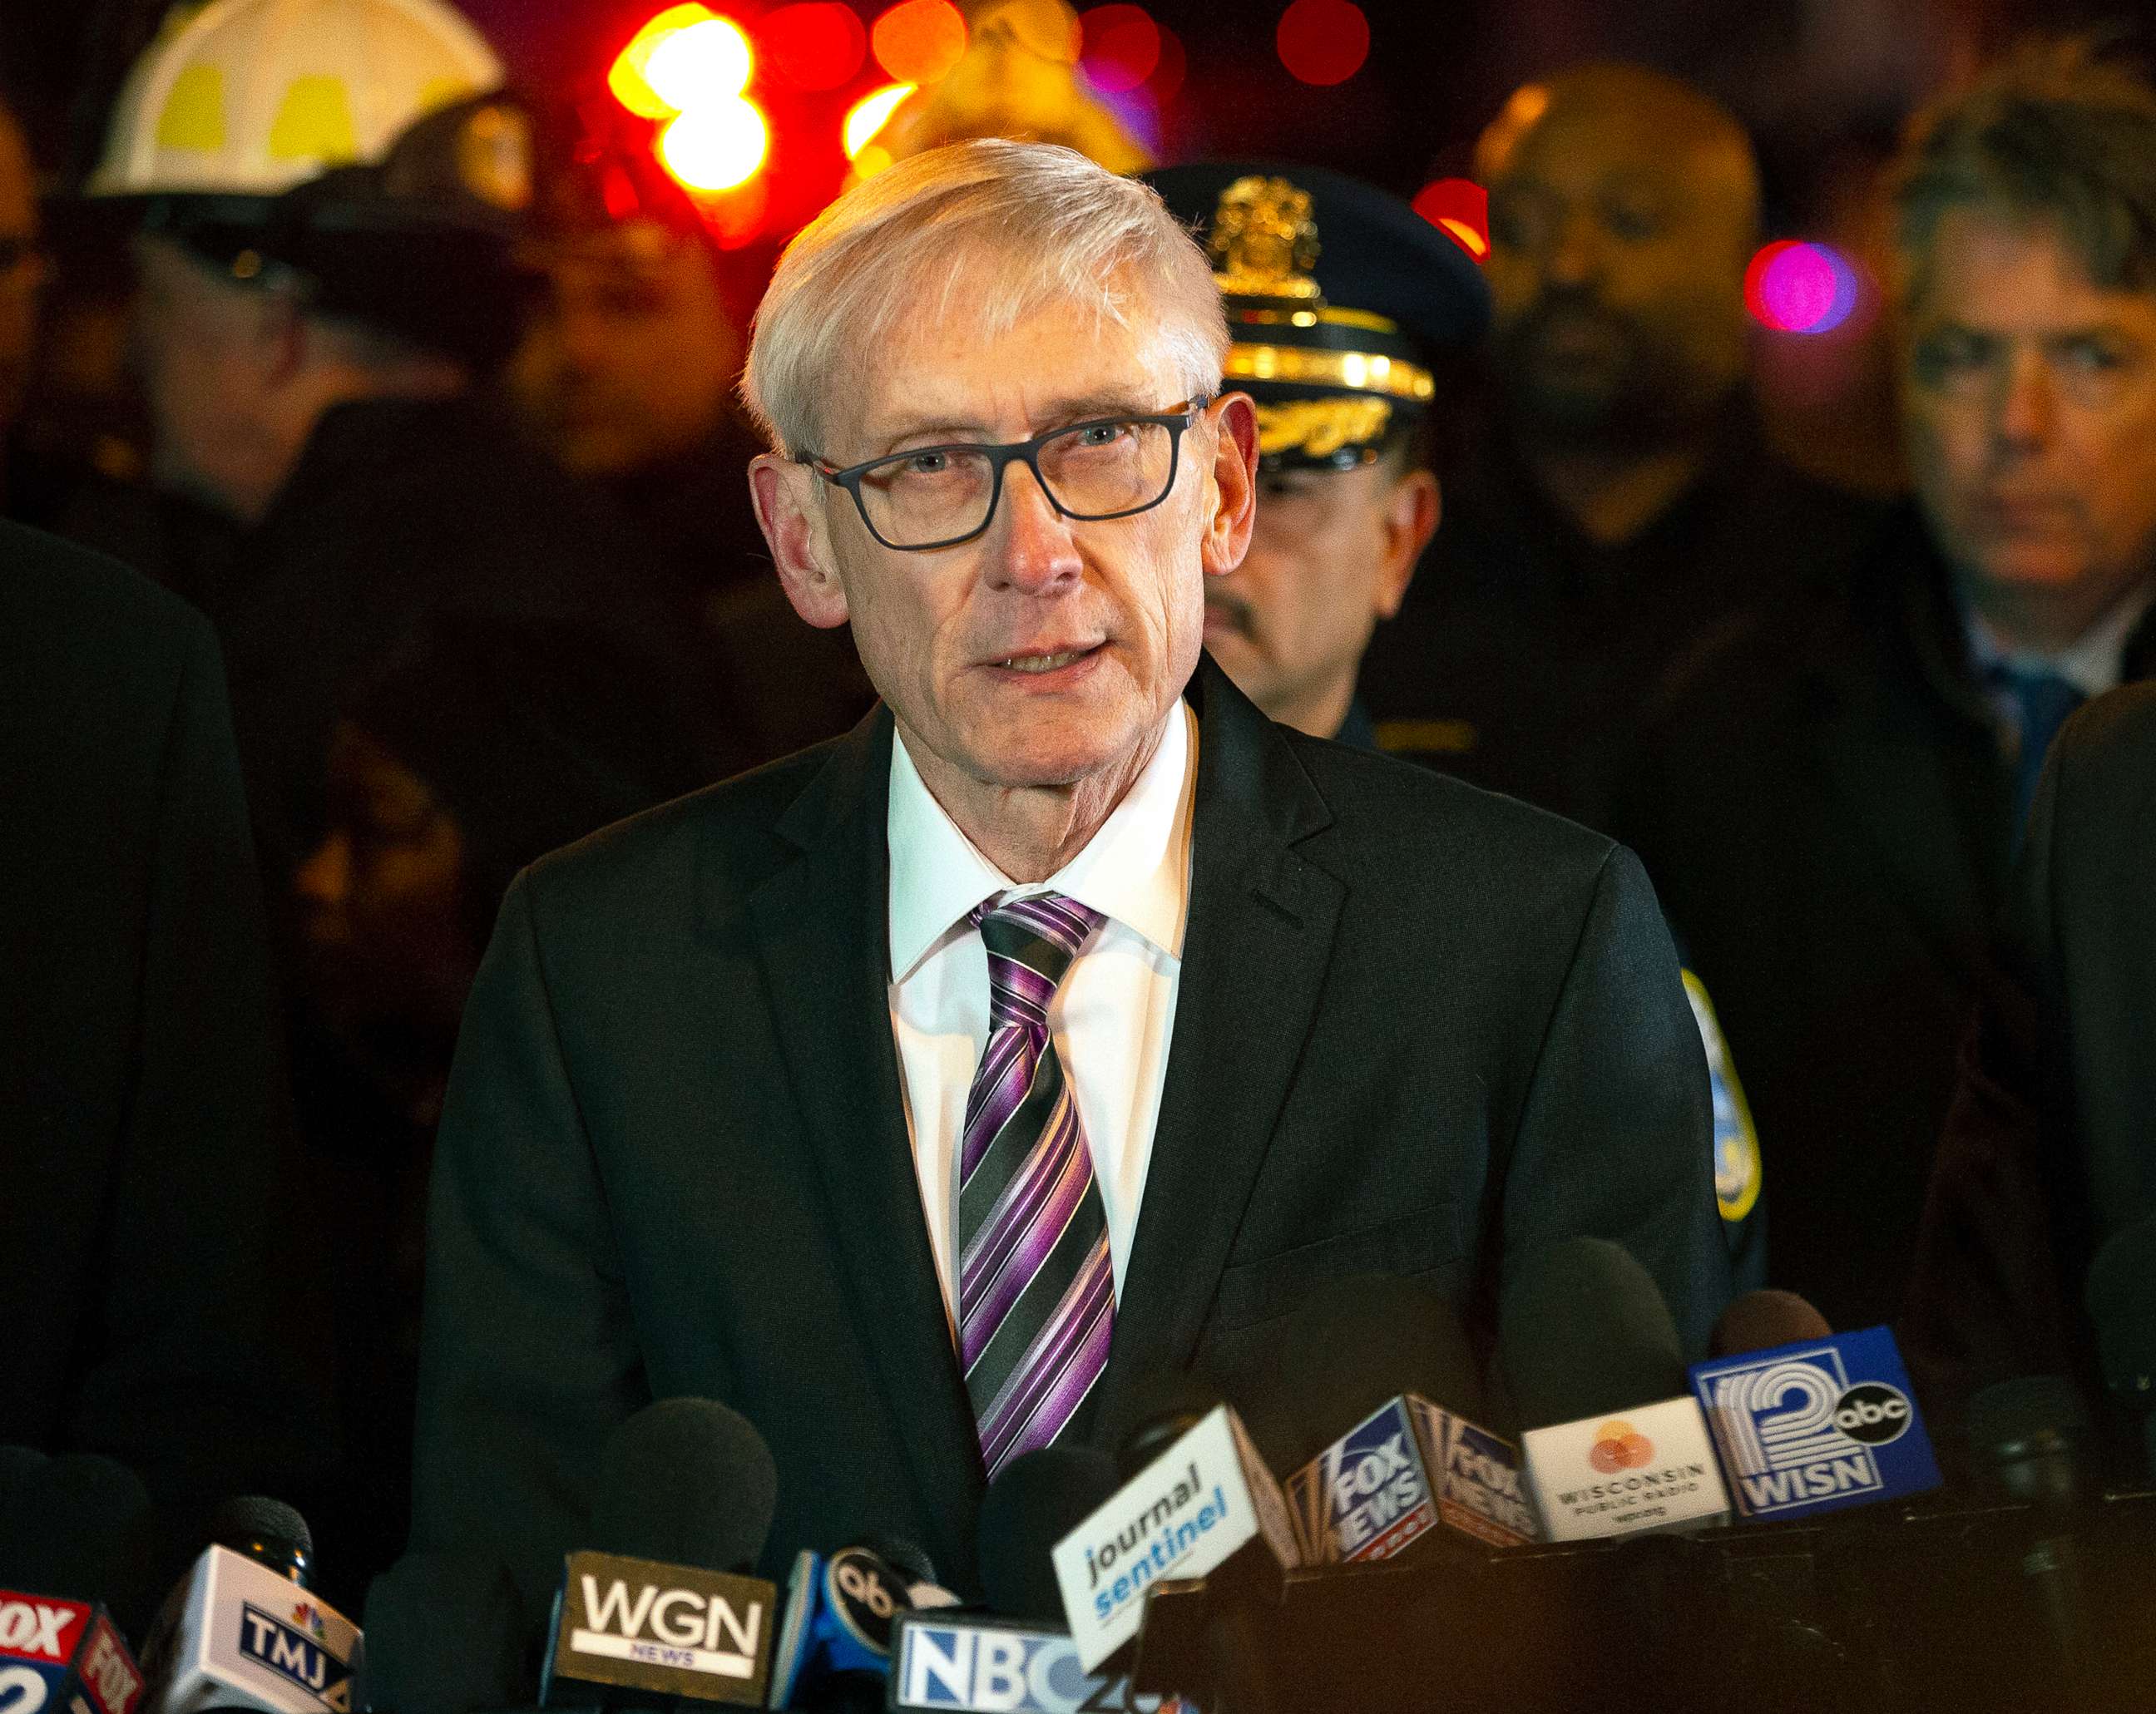 PHOTO: Wisconsin Governor Tony Evers speaks to the media following a shooting at the Molson Coors Brewing Co. campus, Feb. 26, 2020, in Milwaukee.